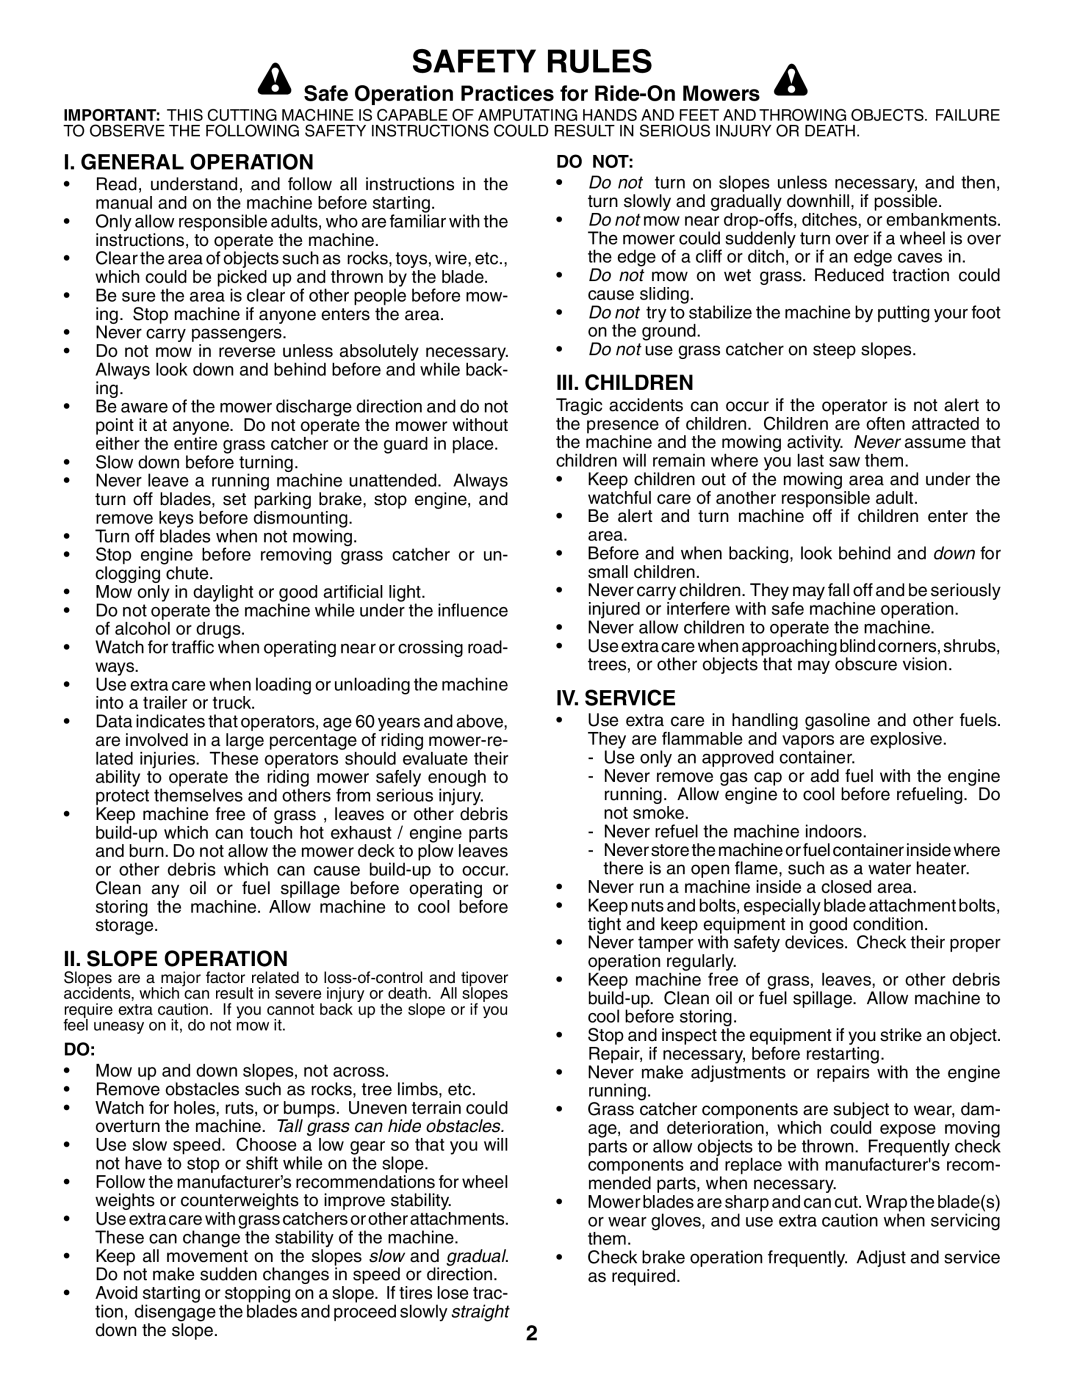 Husqvarna YTH1842 Safety Rules, Safe Operation Practices for Ride-On Mowers, I. General Operation, Ii. Slope Operation 